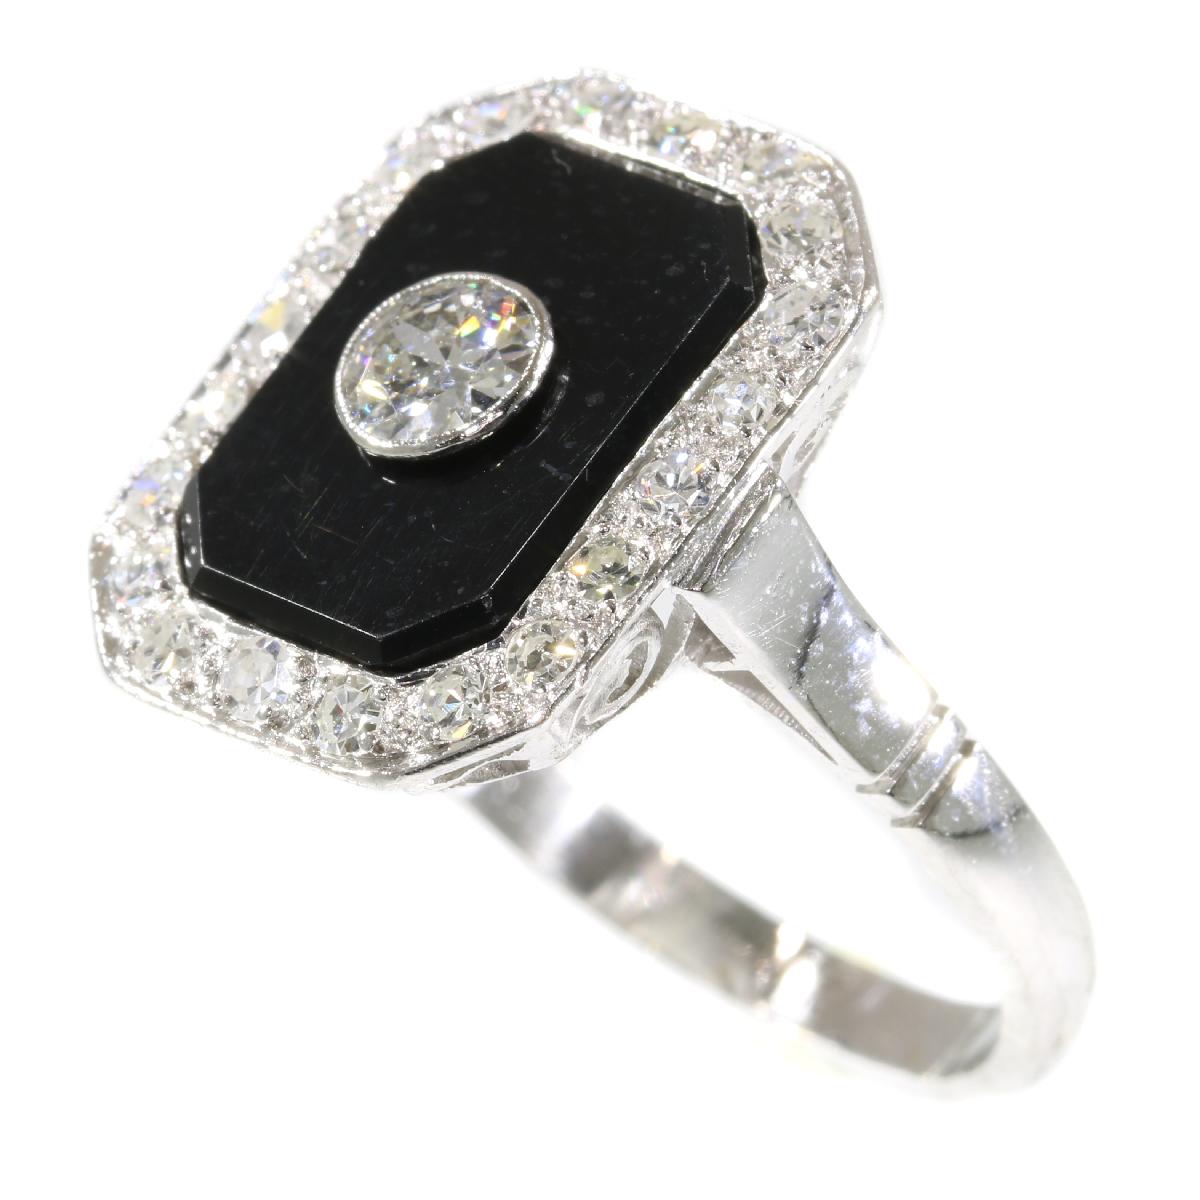 Vintage Platinum Art Deco Style Diamond and Onyx Ring from the 1950s (Rundschliff)